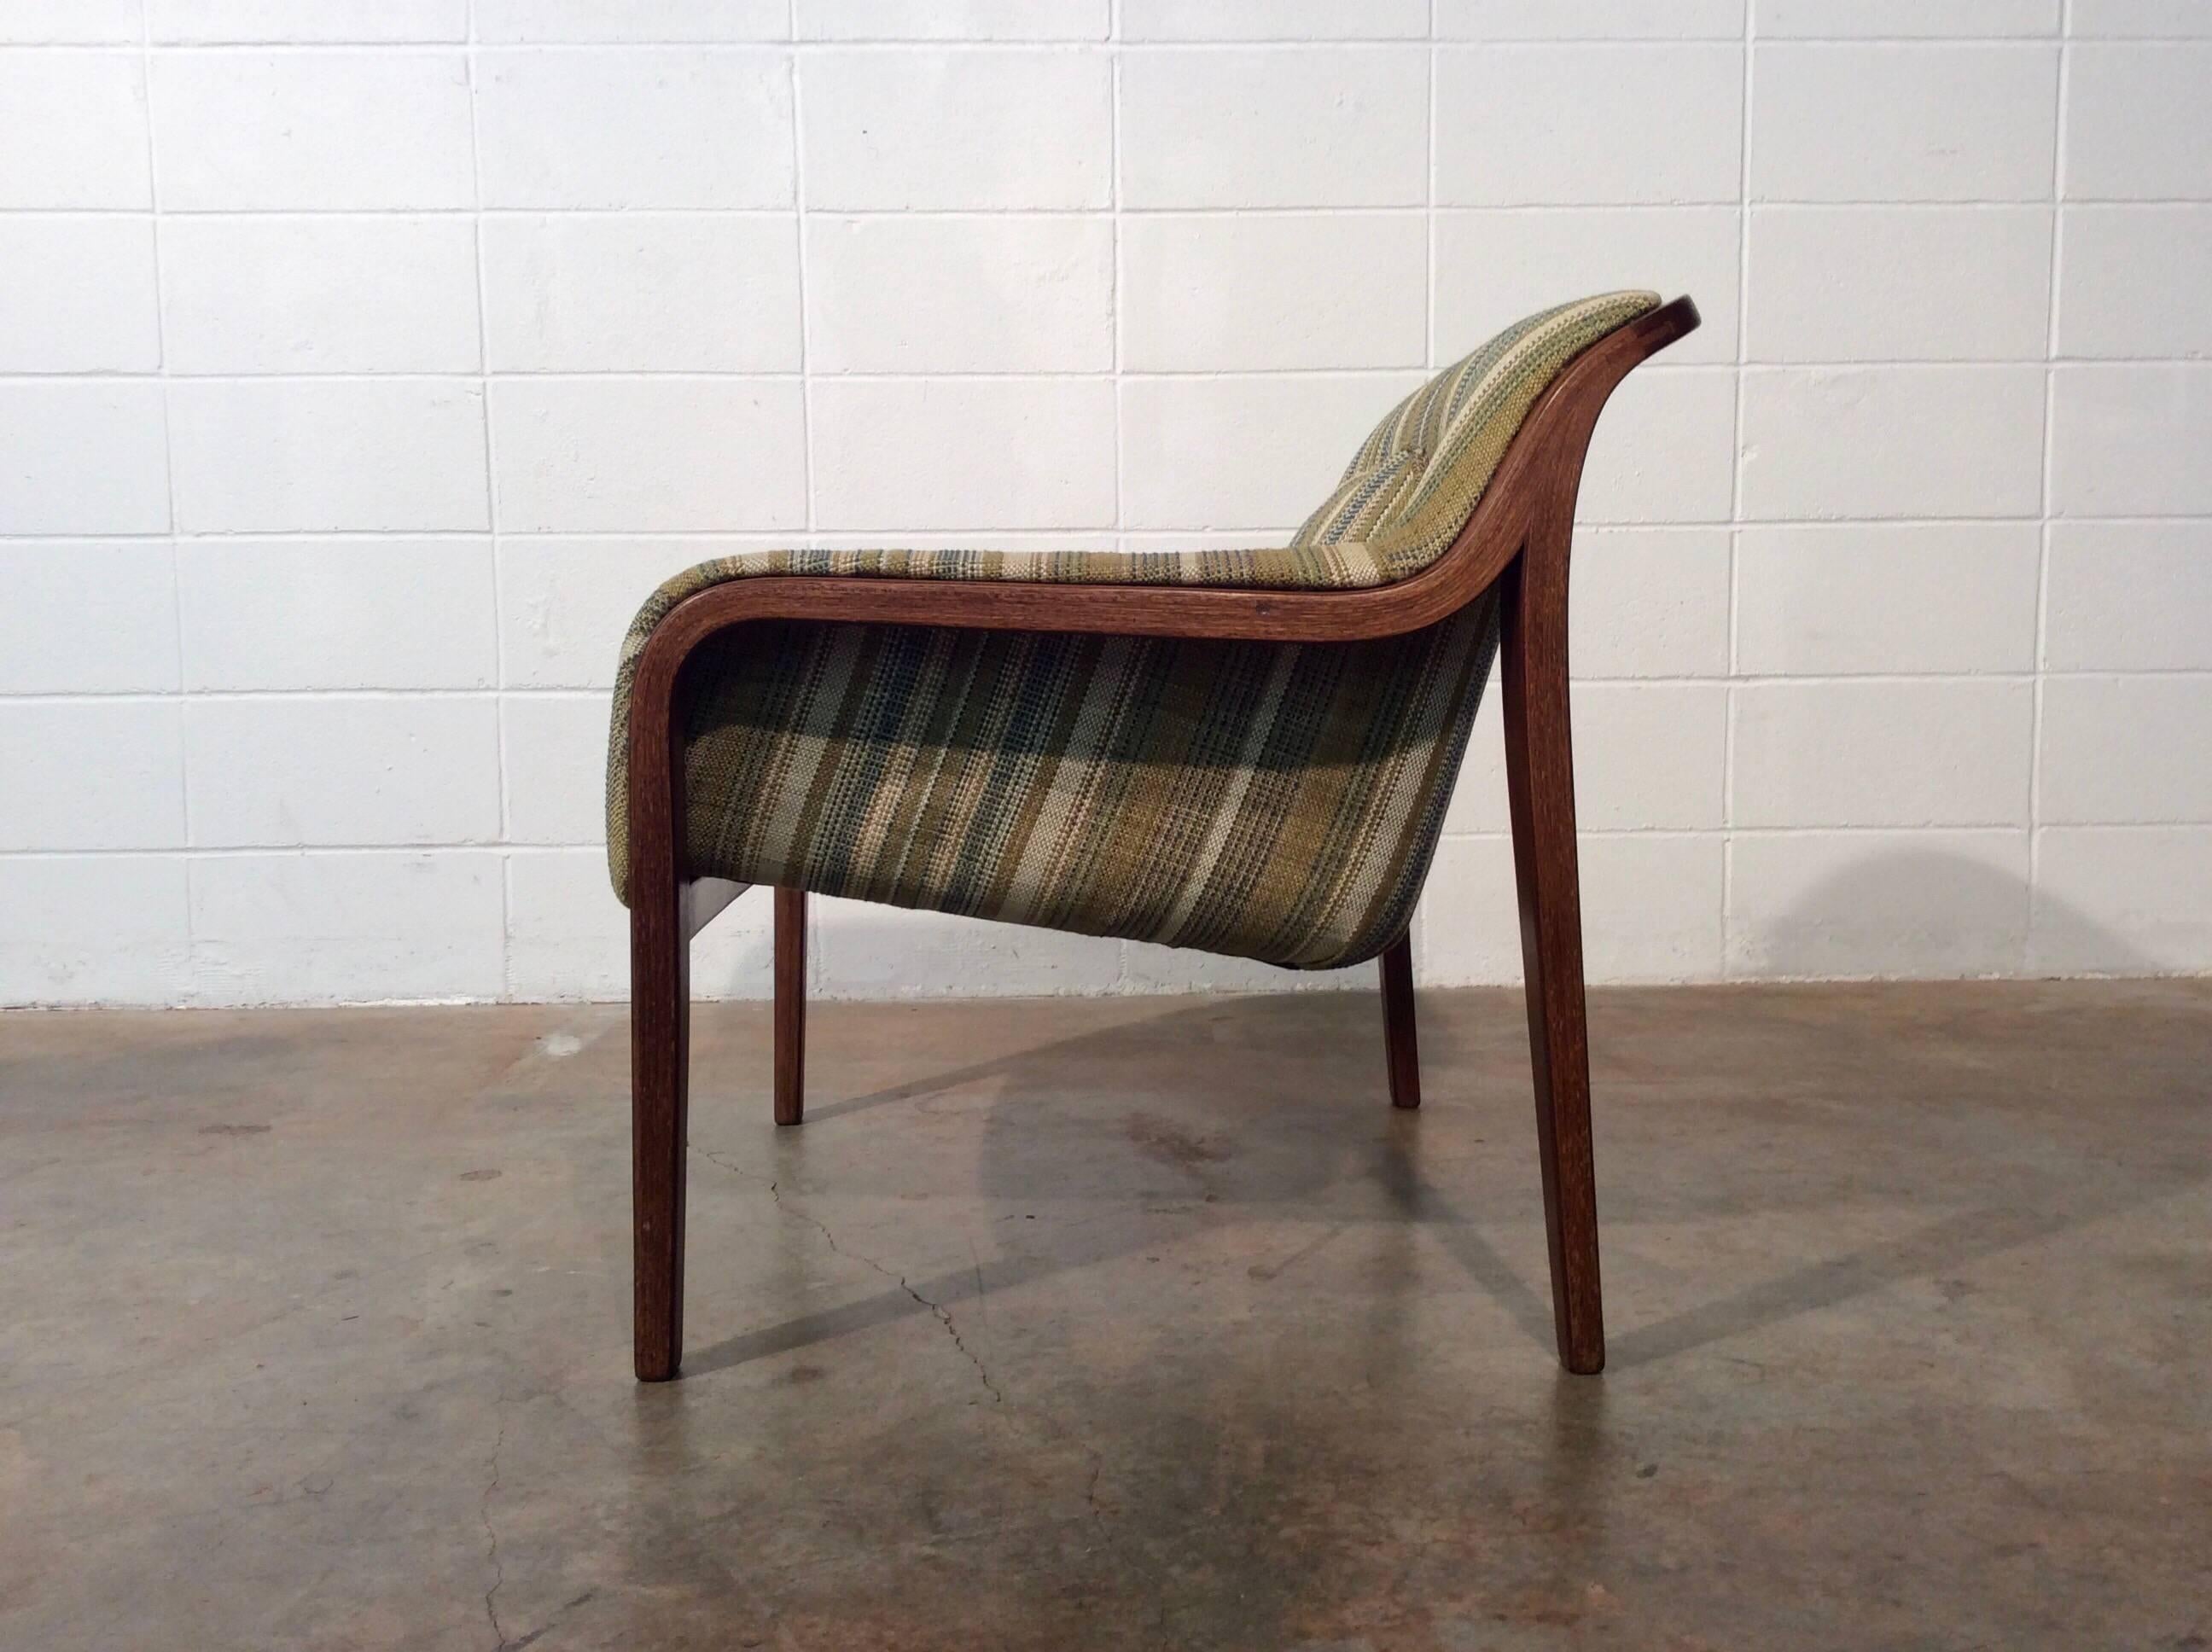 Restored Mid-Century Modern Bent Wood Lounge Chair, Bill Stephens for Knoll 3